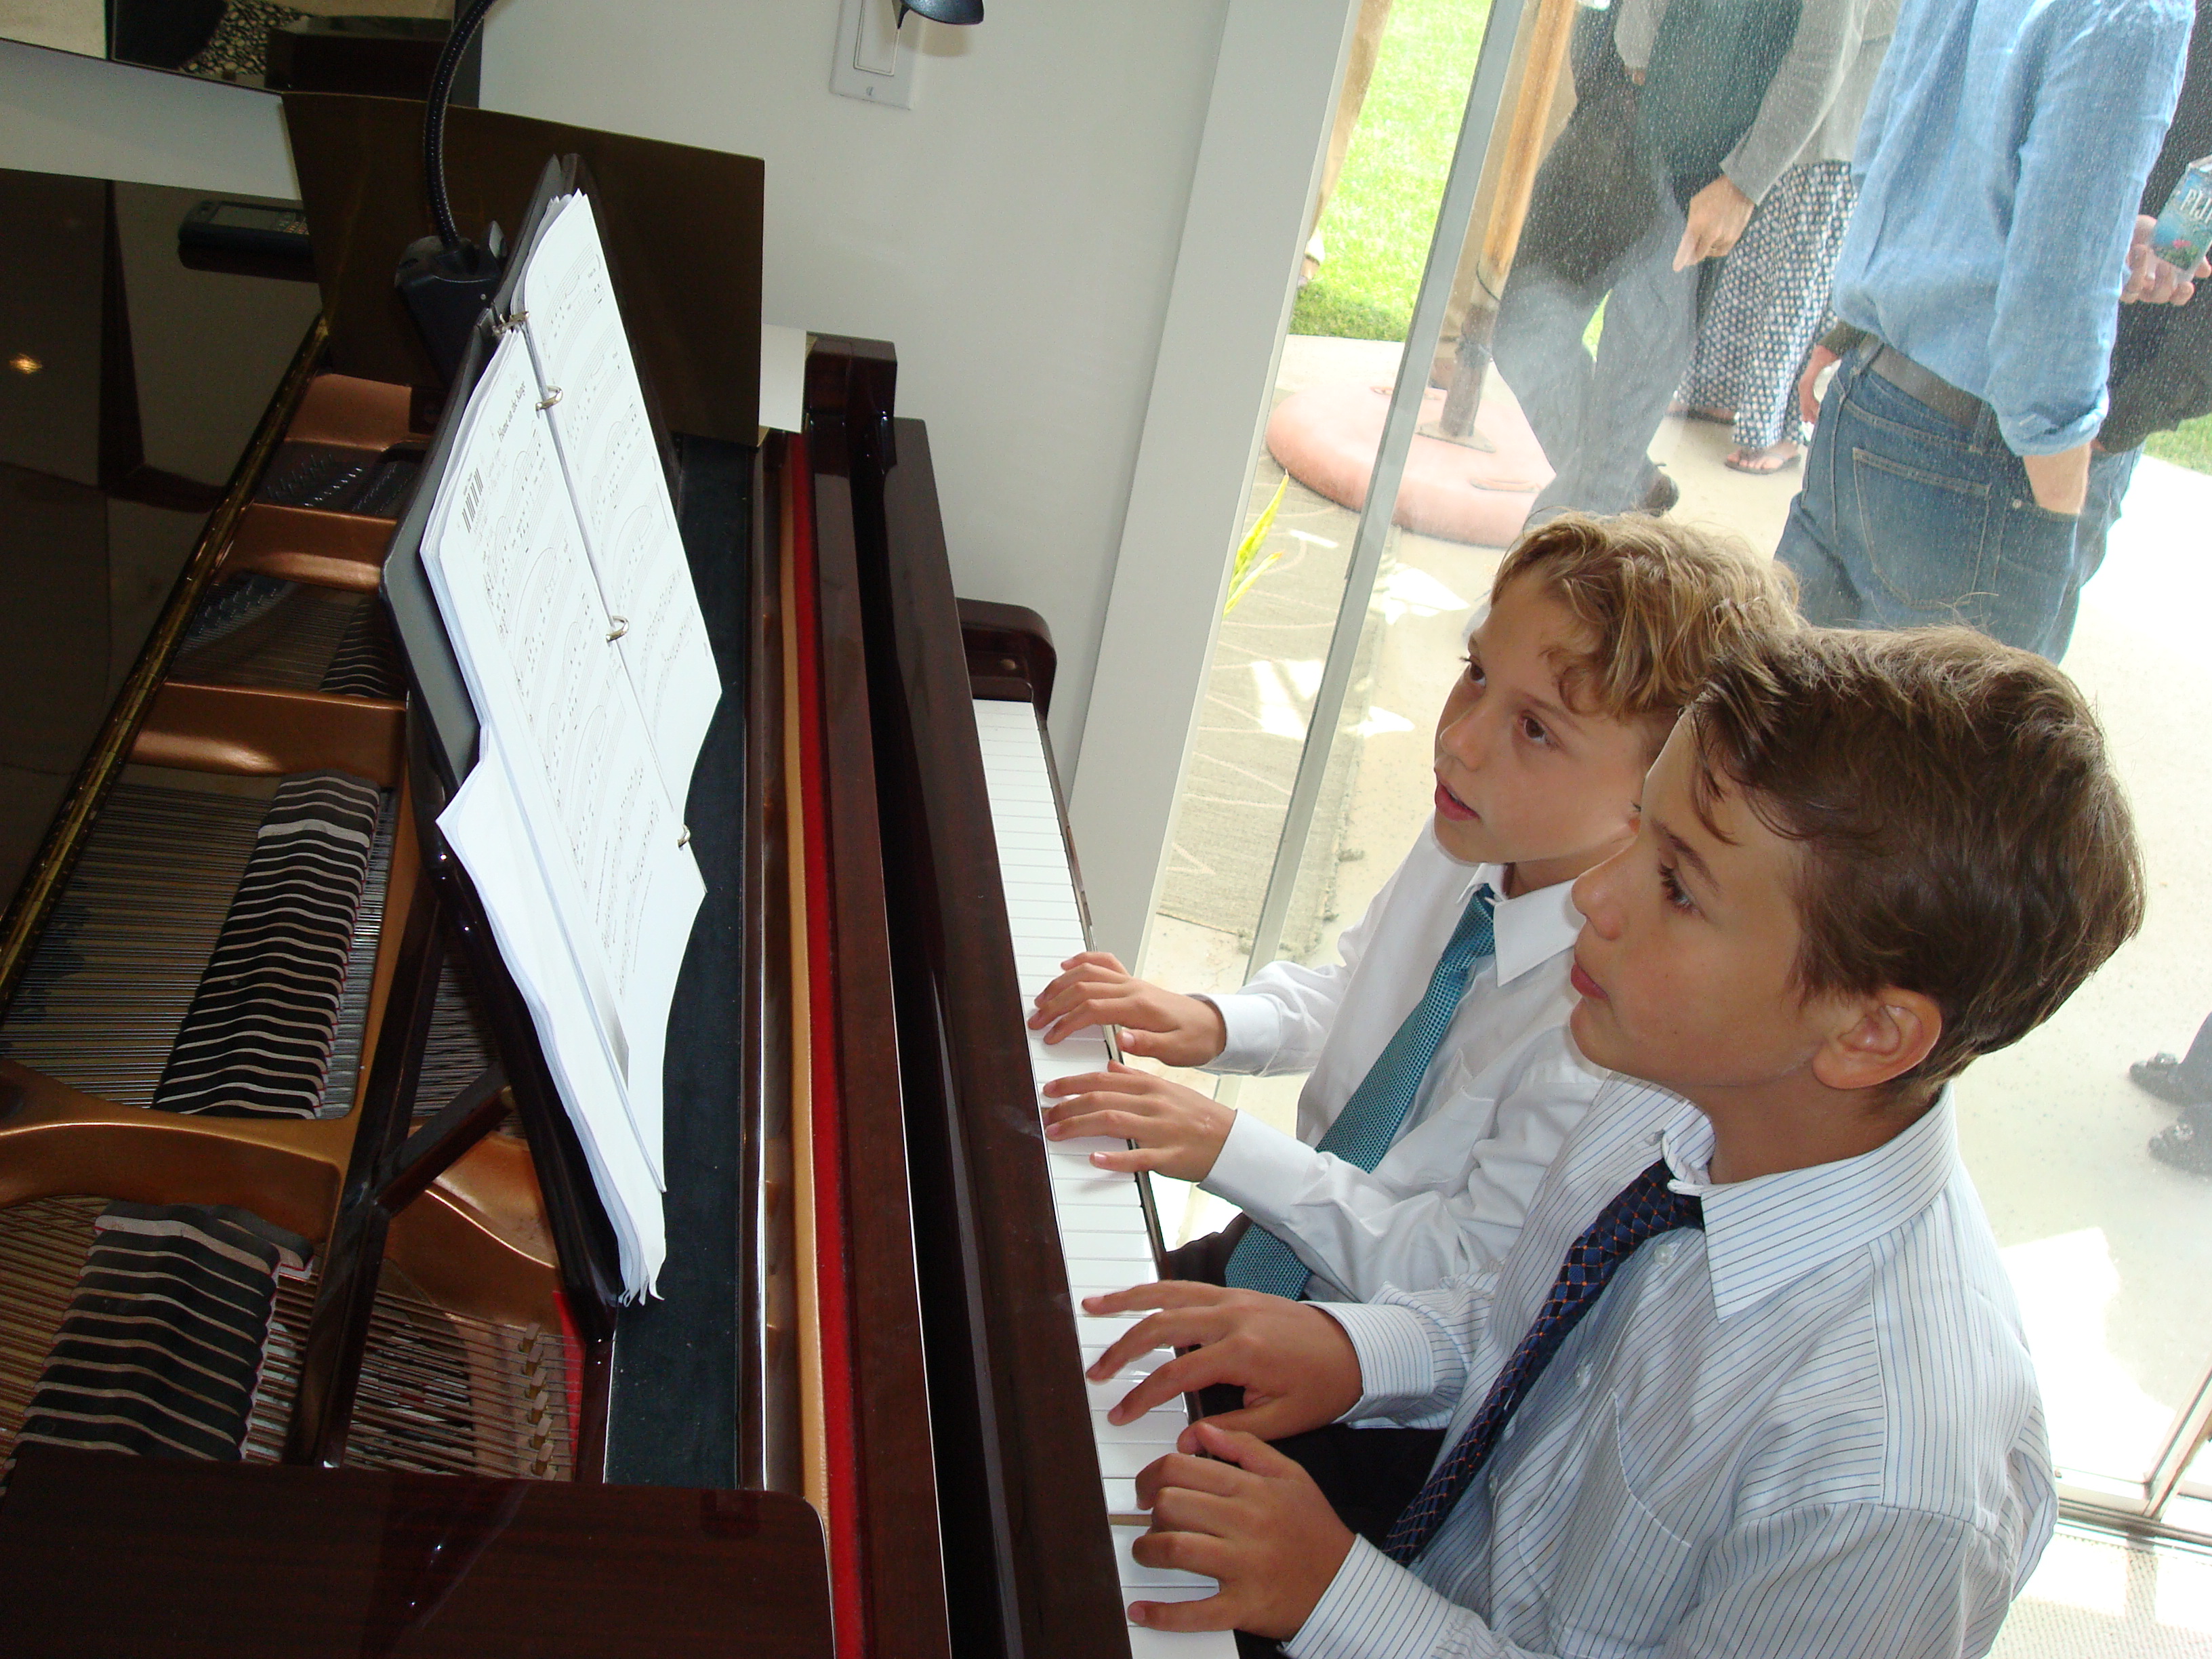 Piano Lessons in Westwood 90024 with Music Teacher LA